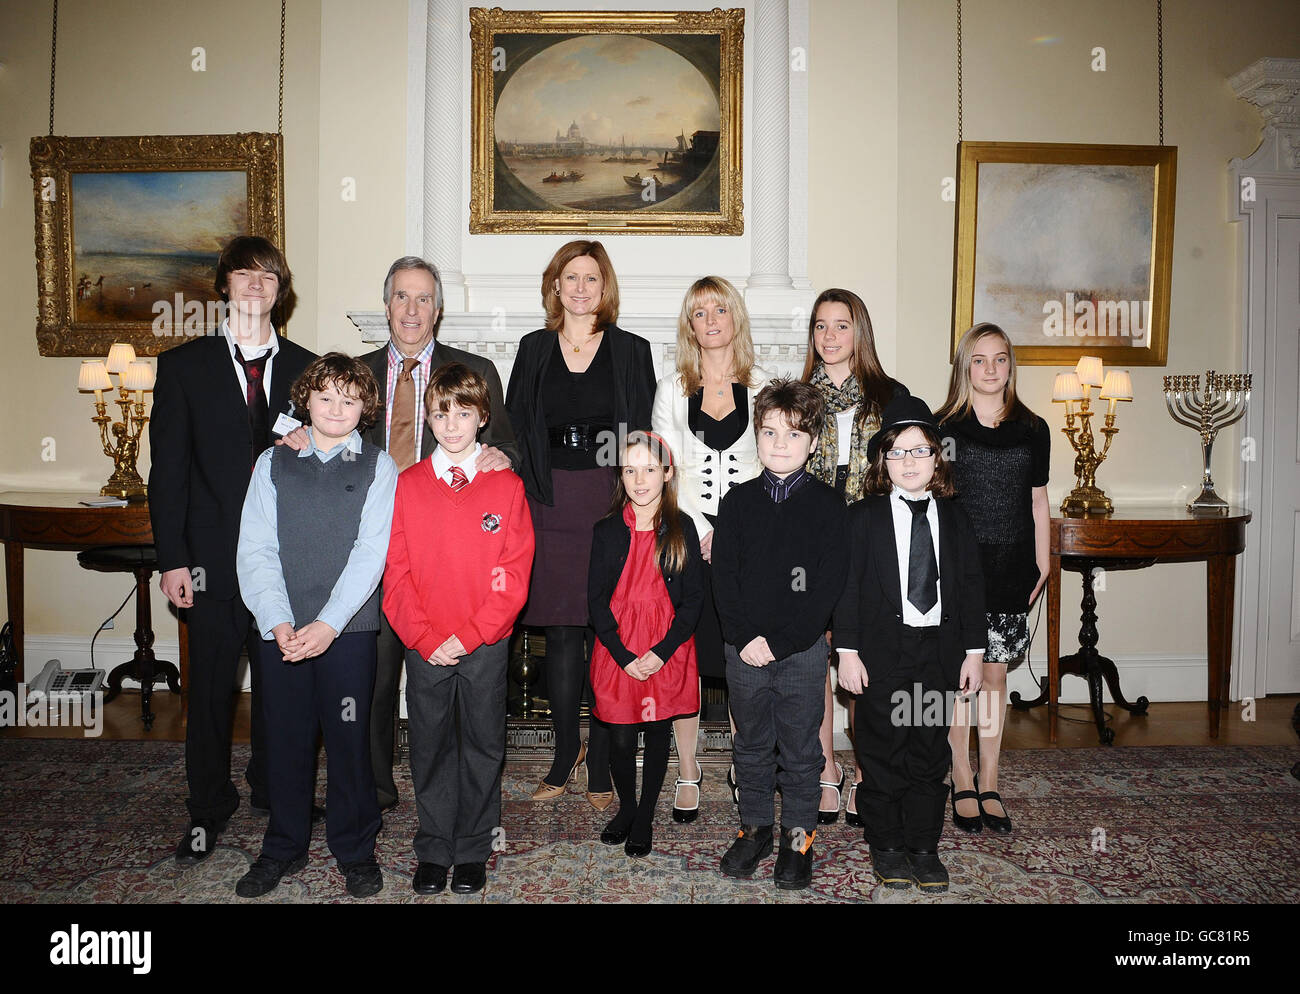 (Back row, left to right) Barney Cox, Henry Winkler, Sarah Brown, Nicky Cox, Bethany Cox, Daisy Cox (front row, left to right) Ben Hunter, Ryan King, Liberty Cox, Isaac Lyons and Evie Lyons pose for a photograph at the launch of the First News My Way! campaign, a scheme to help children with special educational needs, in Downing Street, London. Stock Photo